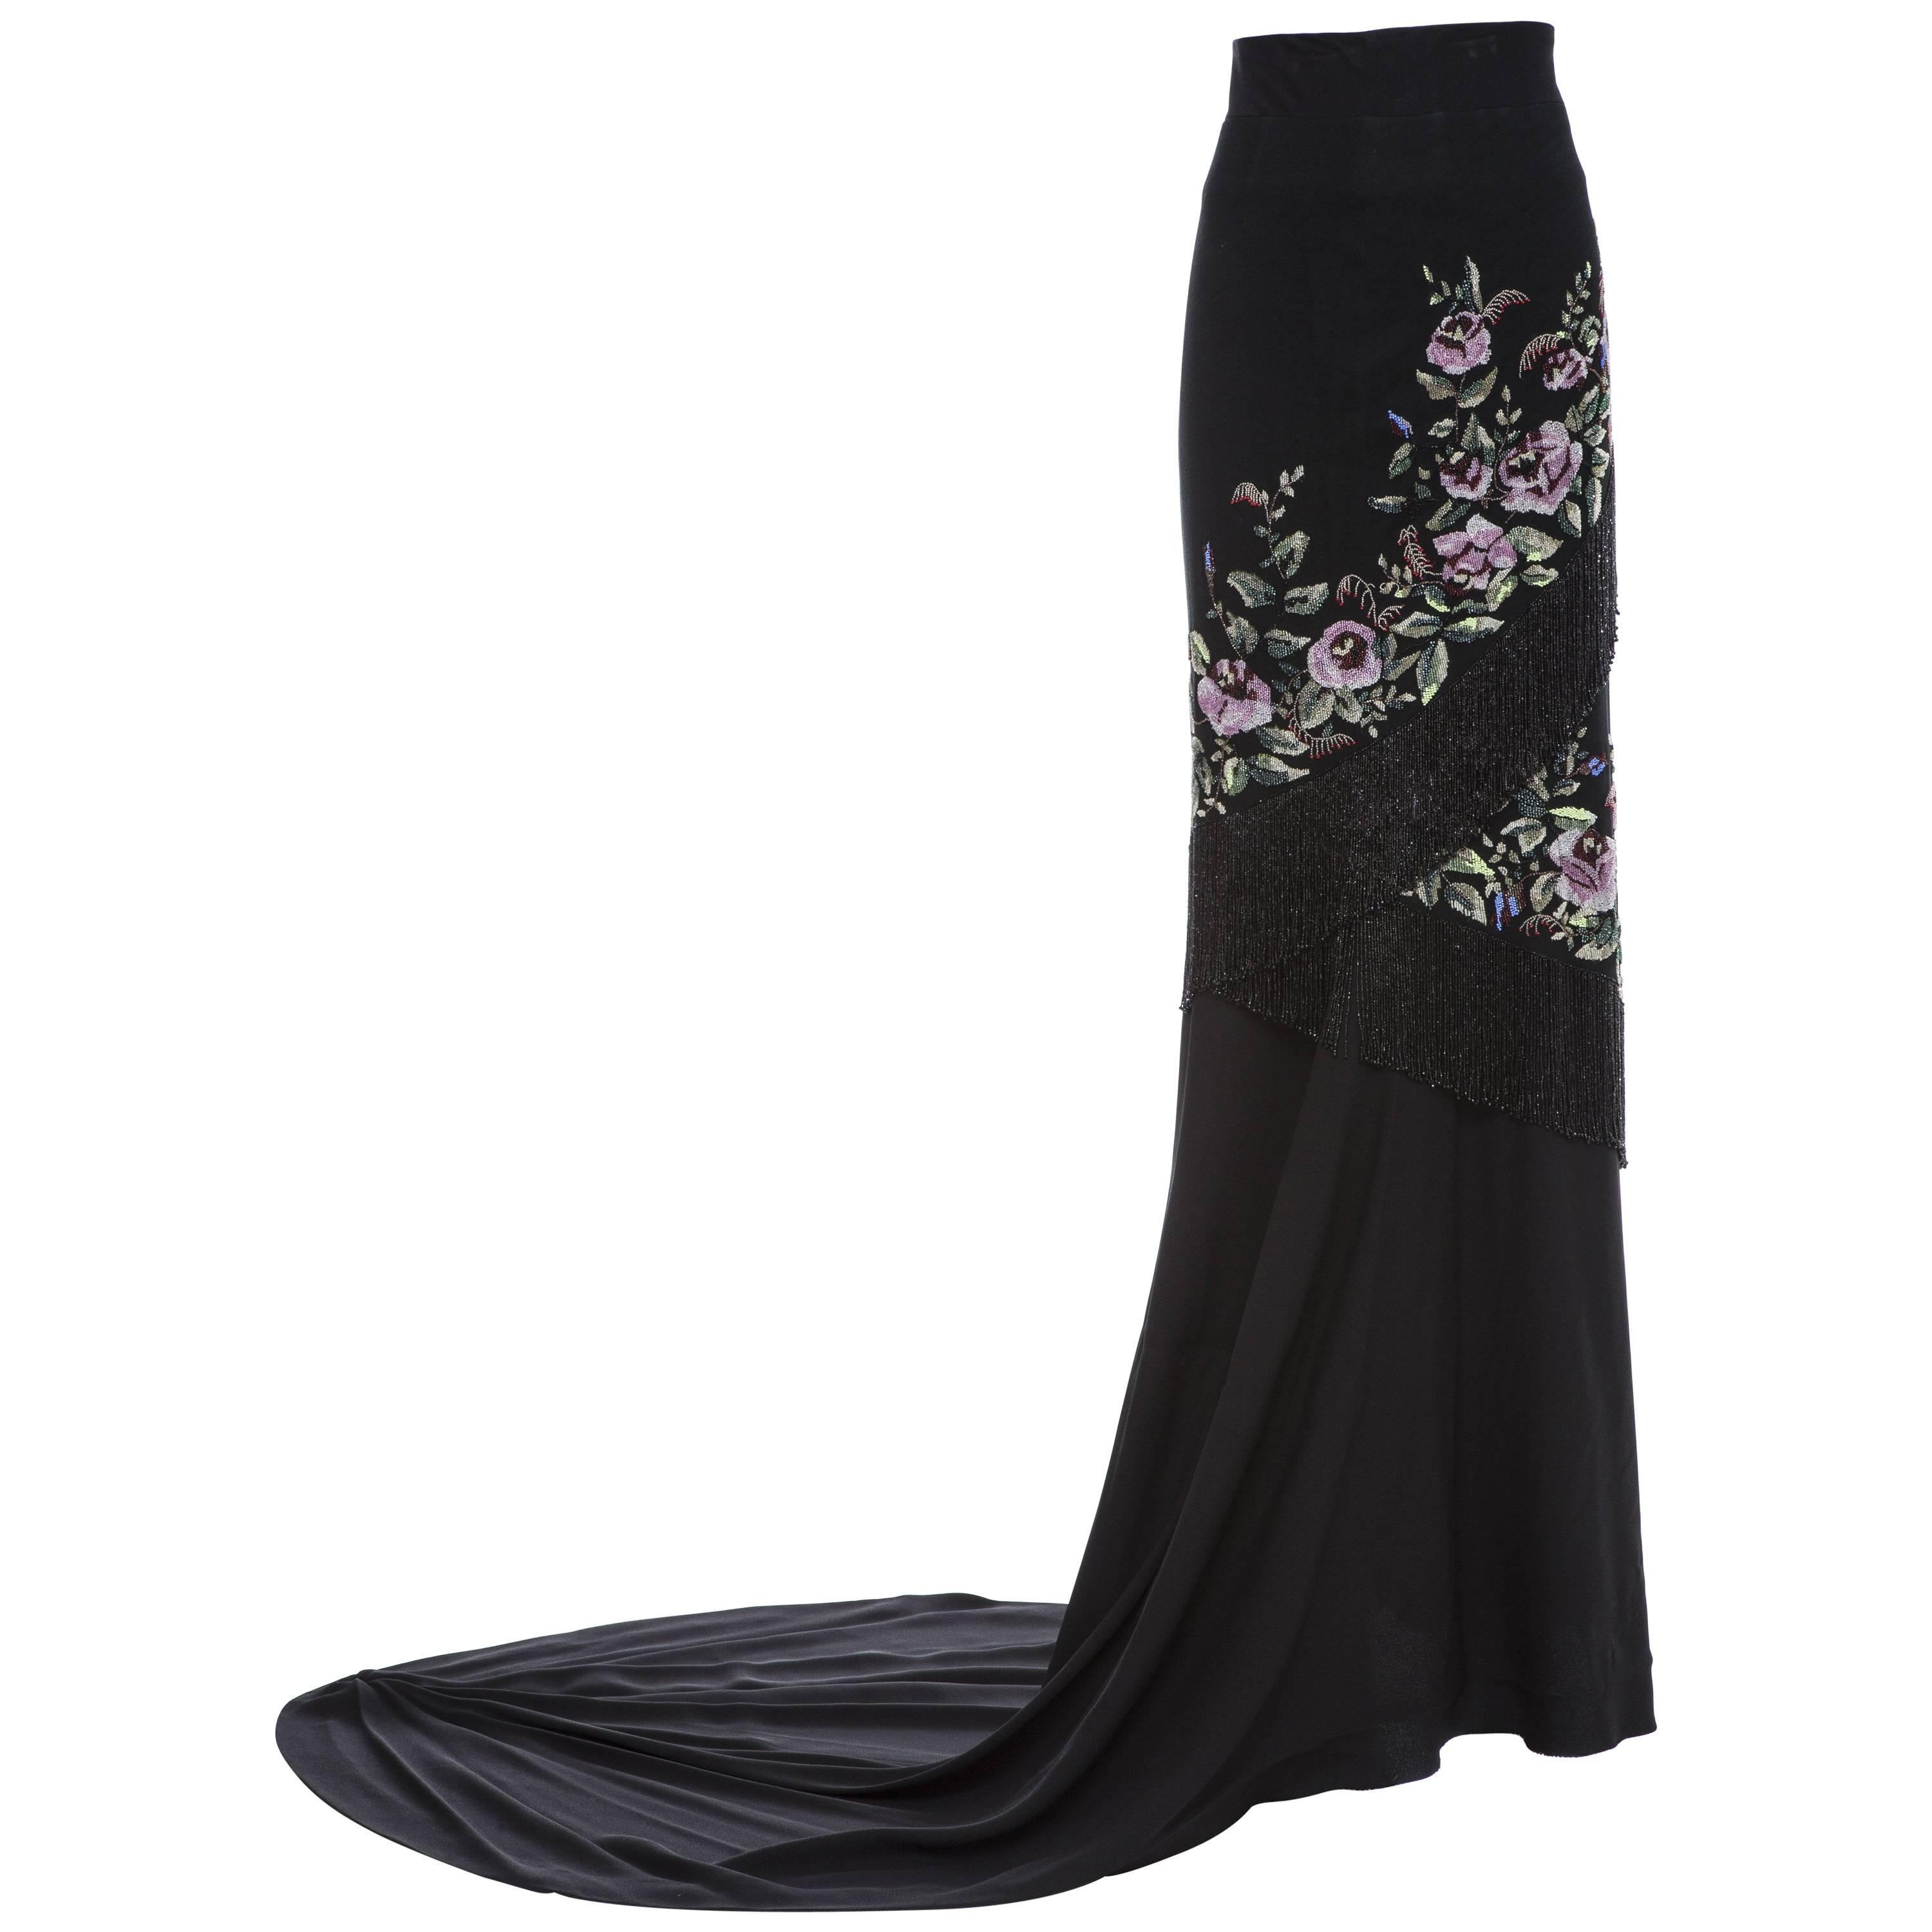  Alexander McQueen Givenchy Haute Couture Runway Black Beaded Skirt, Fall 1998 im Angebot